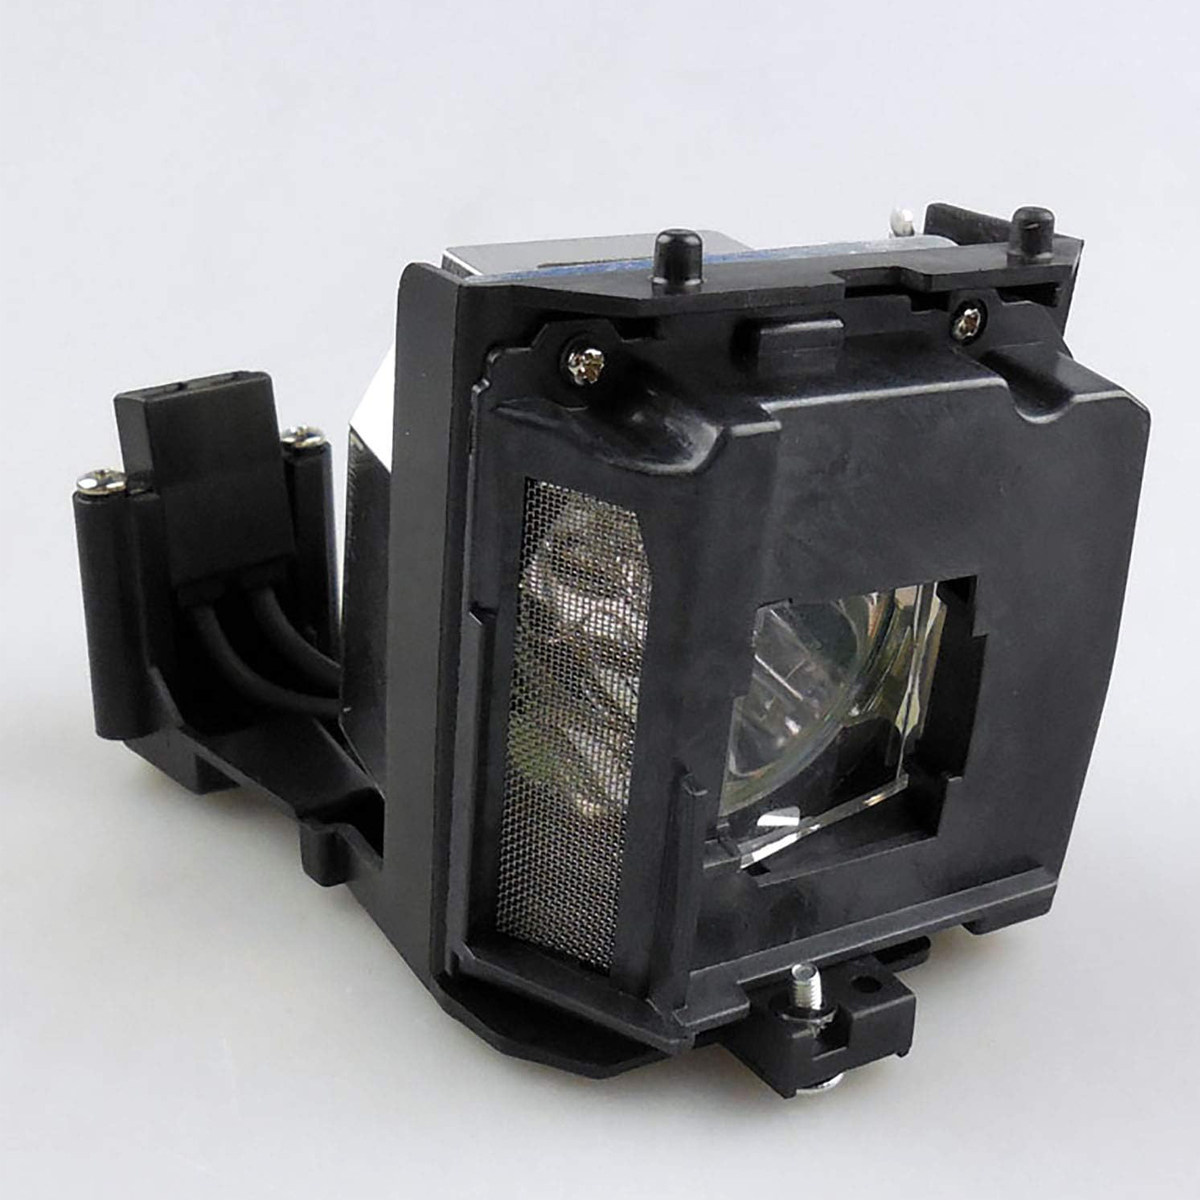 Replacement Projector lamp AN-XR30LP For SHARP PG-F150X PG-F211X PG-F216X